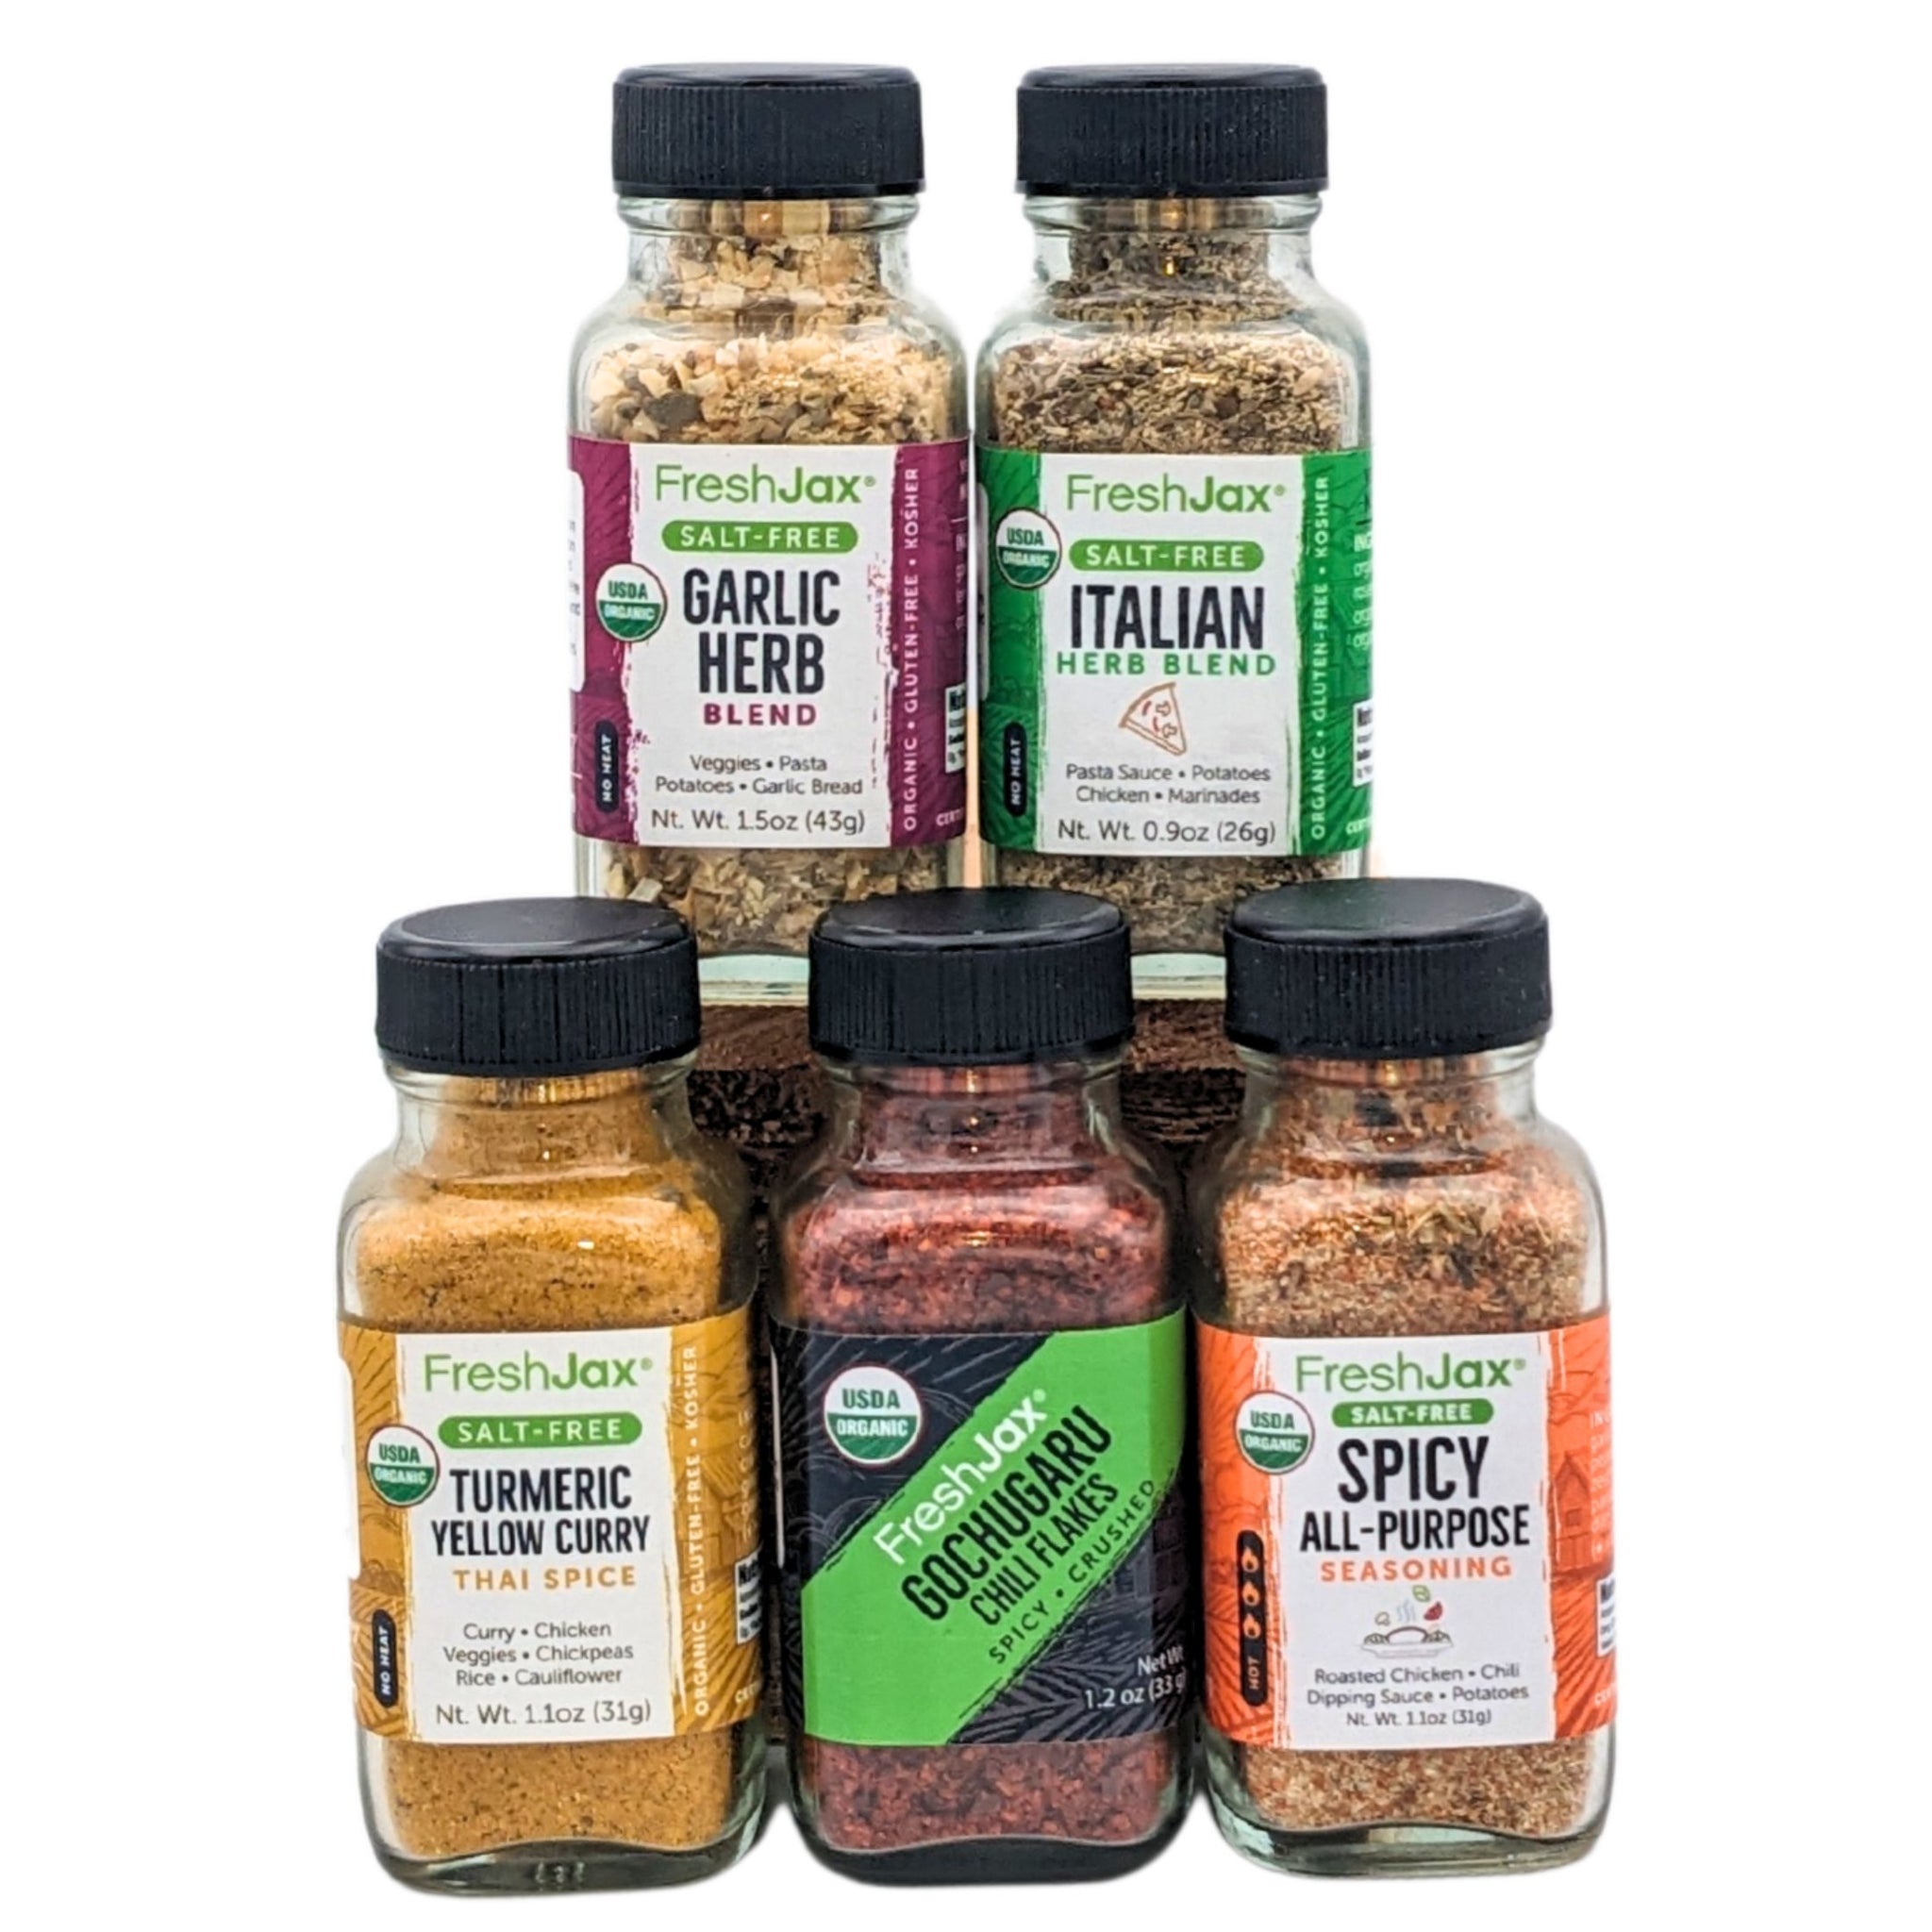 Order Spices, Seasonings & Mixes products from Fairo Grocery Mart in  Faisalabad